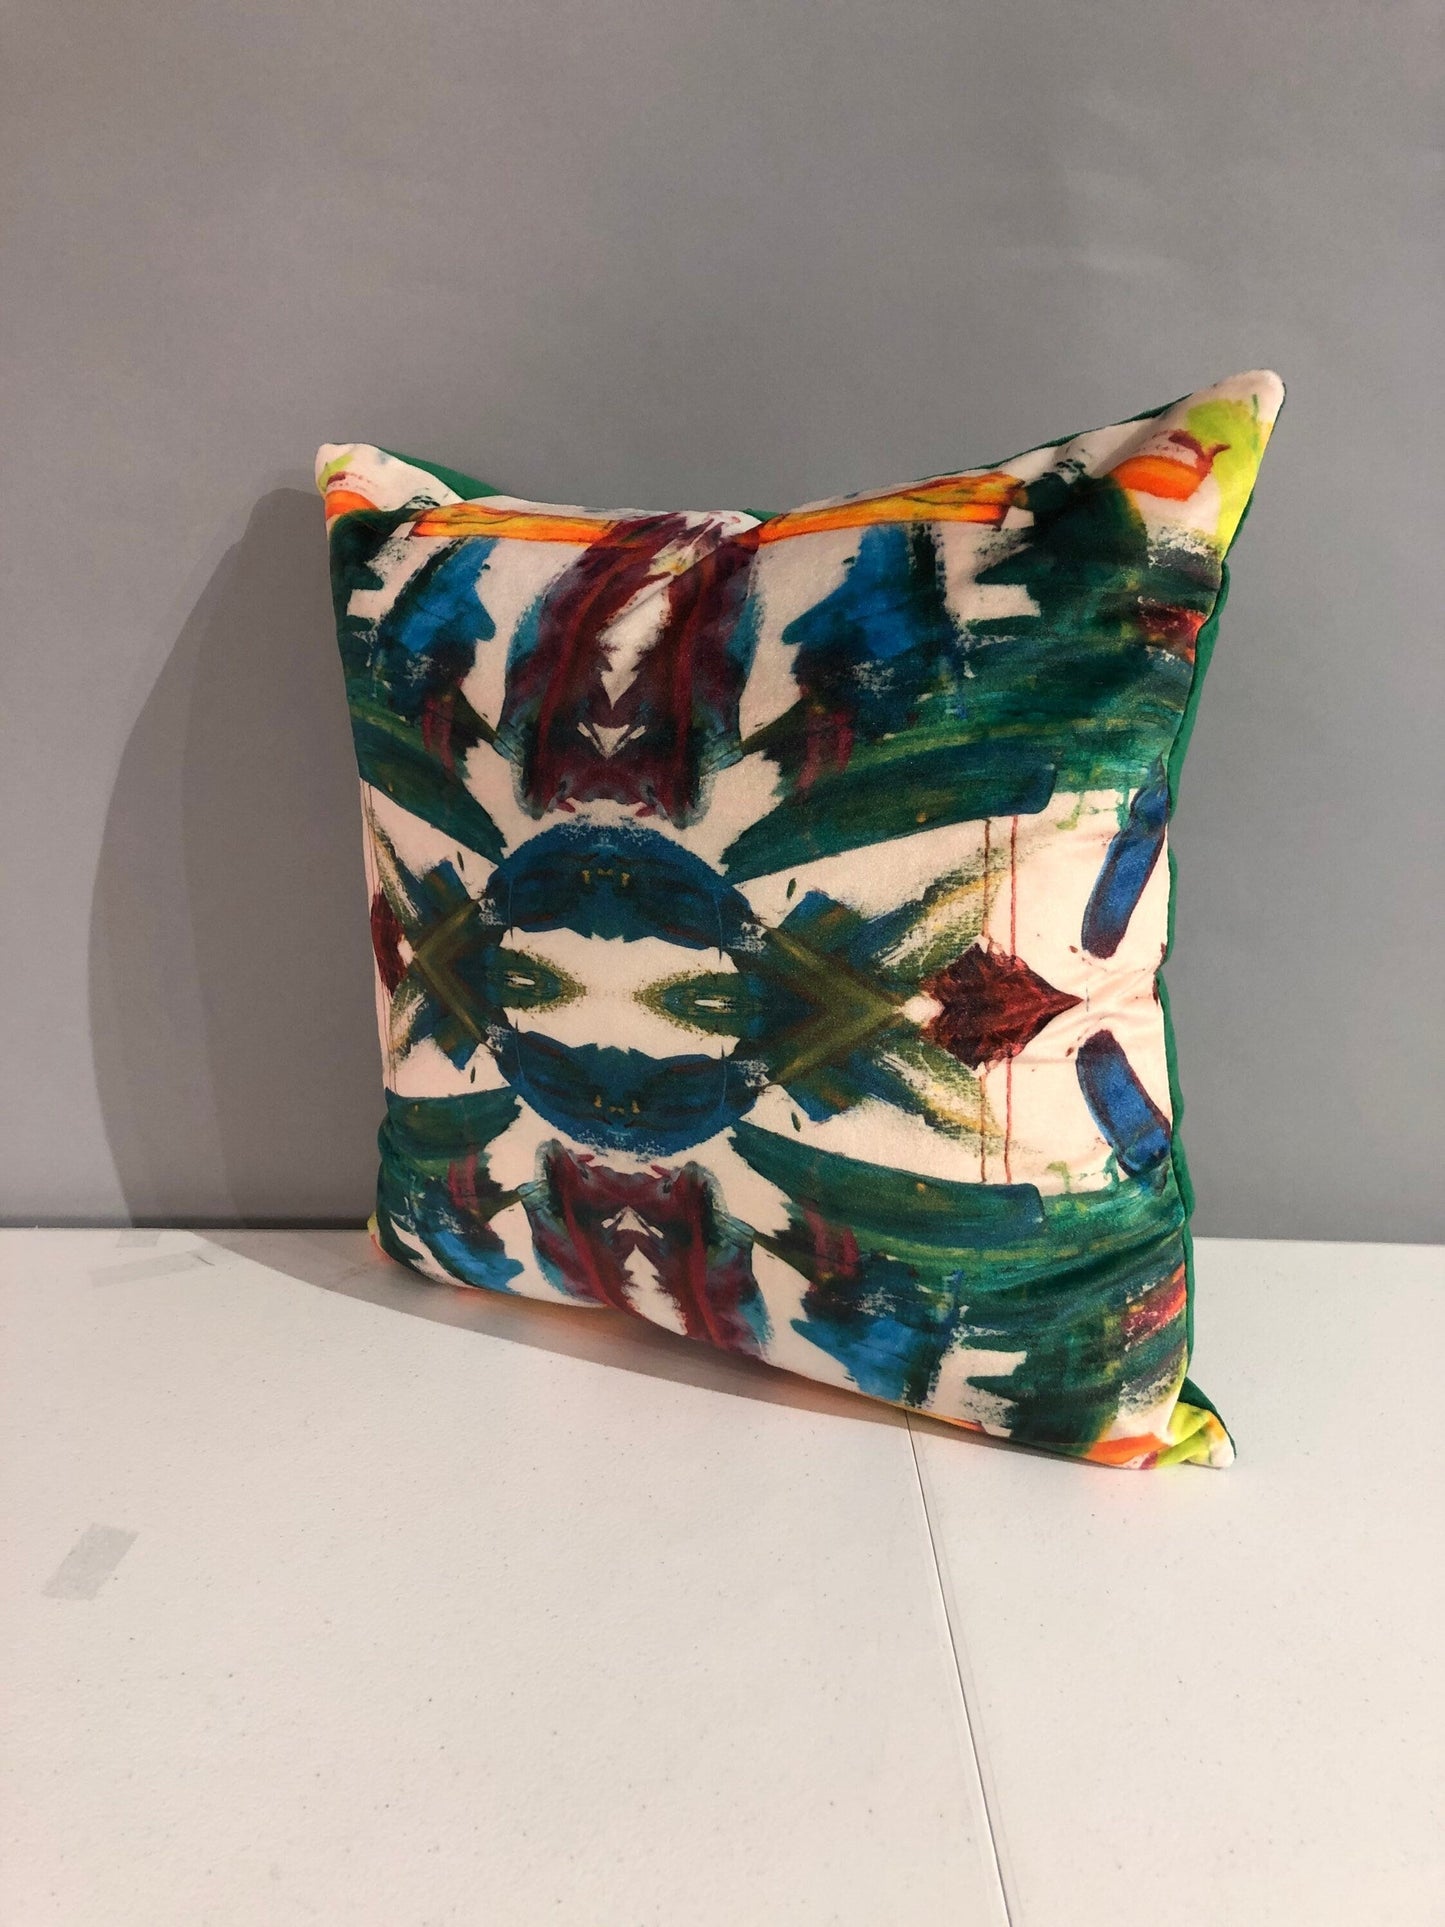 Contemporary abstract kaleidoscope pillows with print on velvet with green velvet in the back 16” x 16” inches